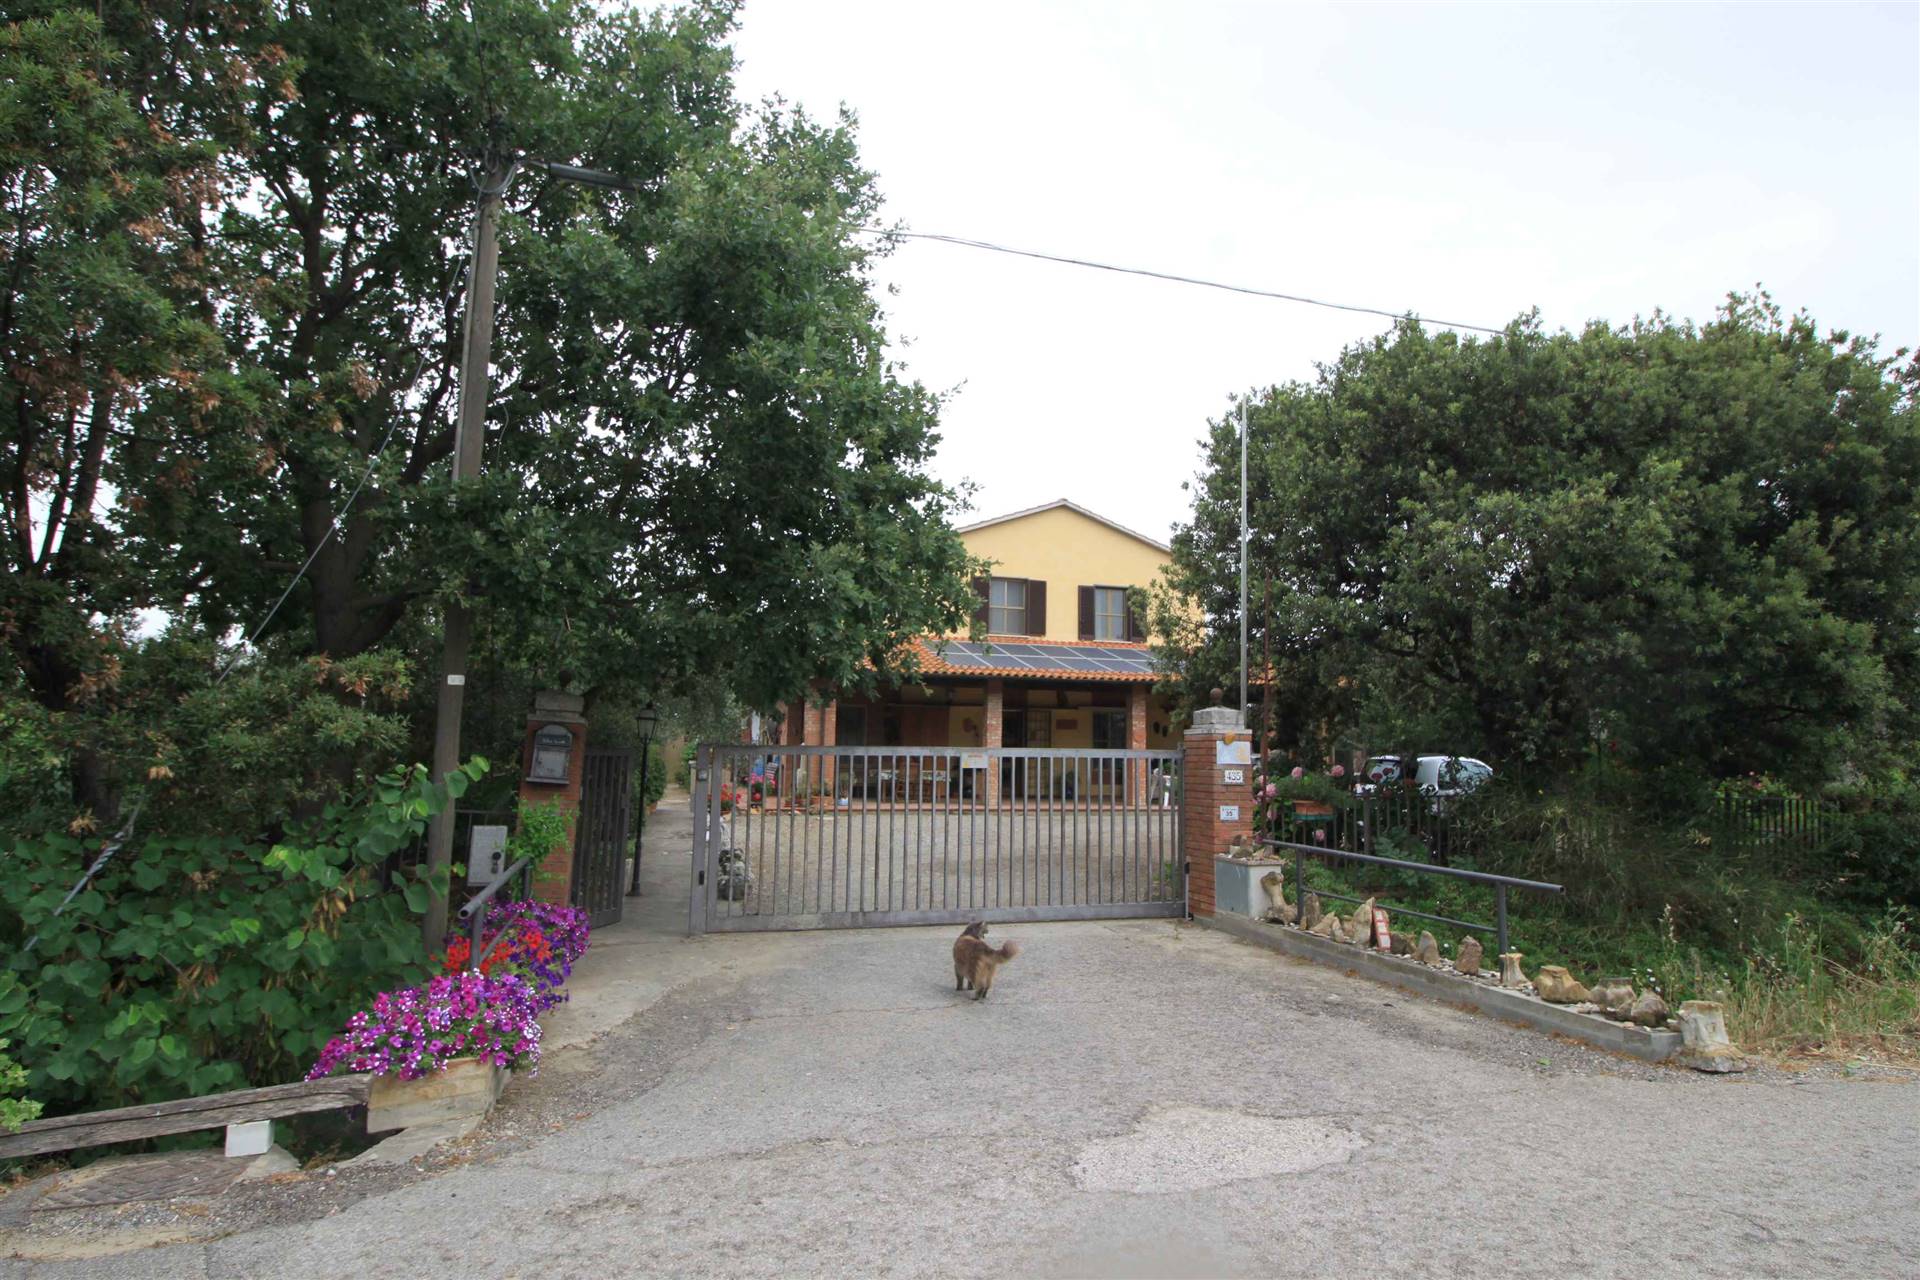 PRINCIPINA TERRA, GROSSETO, Villa for sale of 242 Sq. mt., Be restored, Heating Individual heating system, Energetic class: C, placed at Ground on 1, 